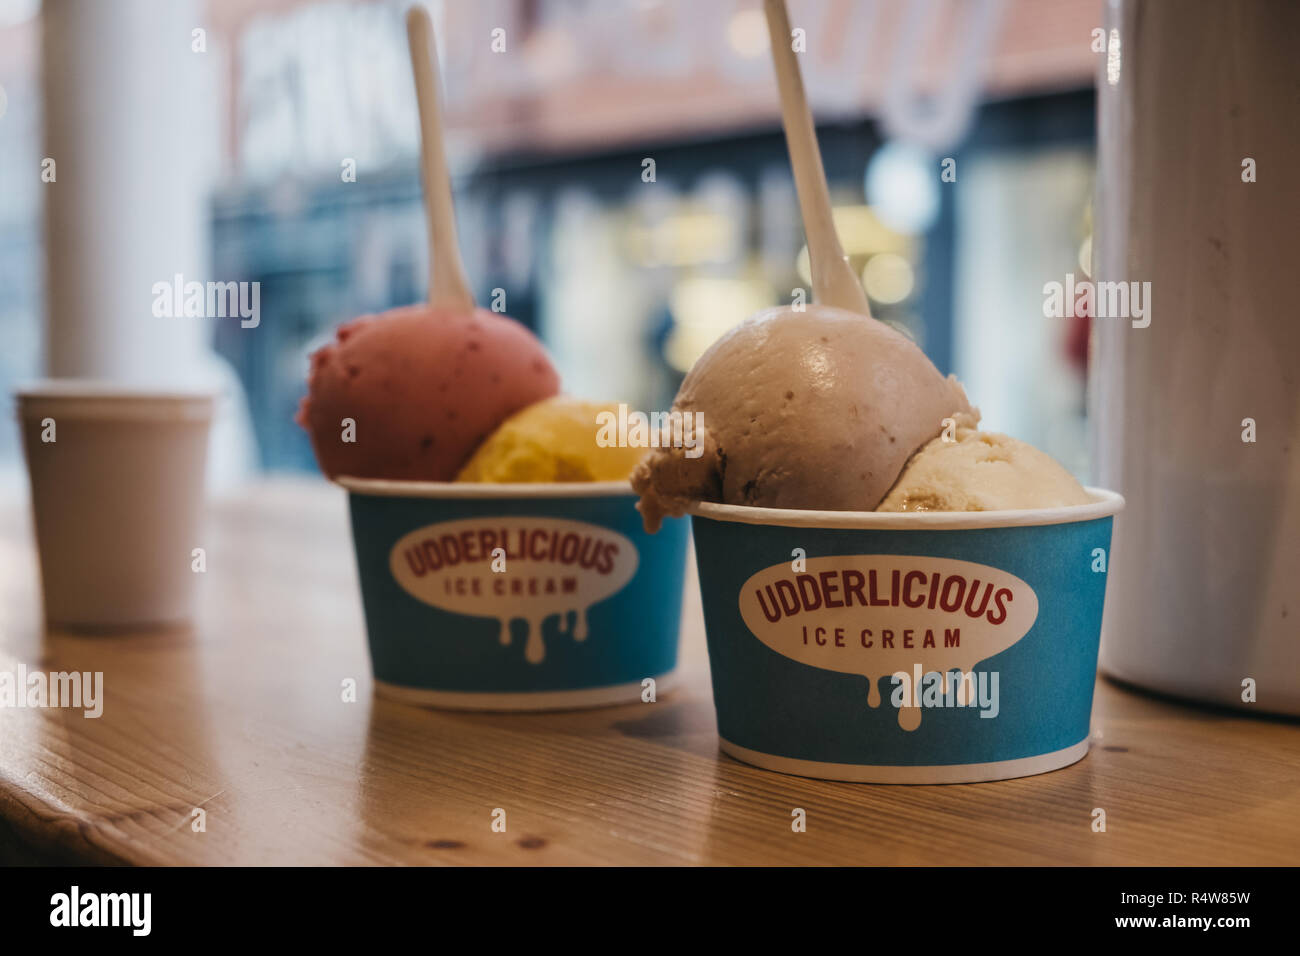 London, UK - November 21, 2018: Tubs of ice-cream on a table inside Udderlicious, an independent ice-cream parlour in Covent Garden, London, UK. Stock Photo